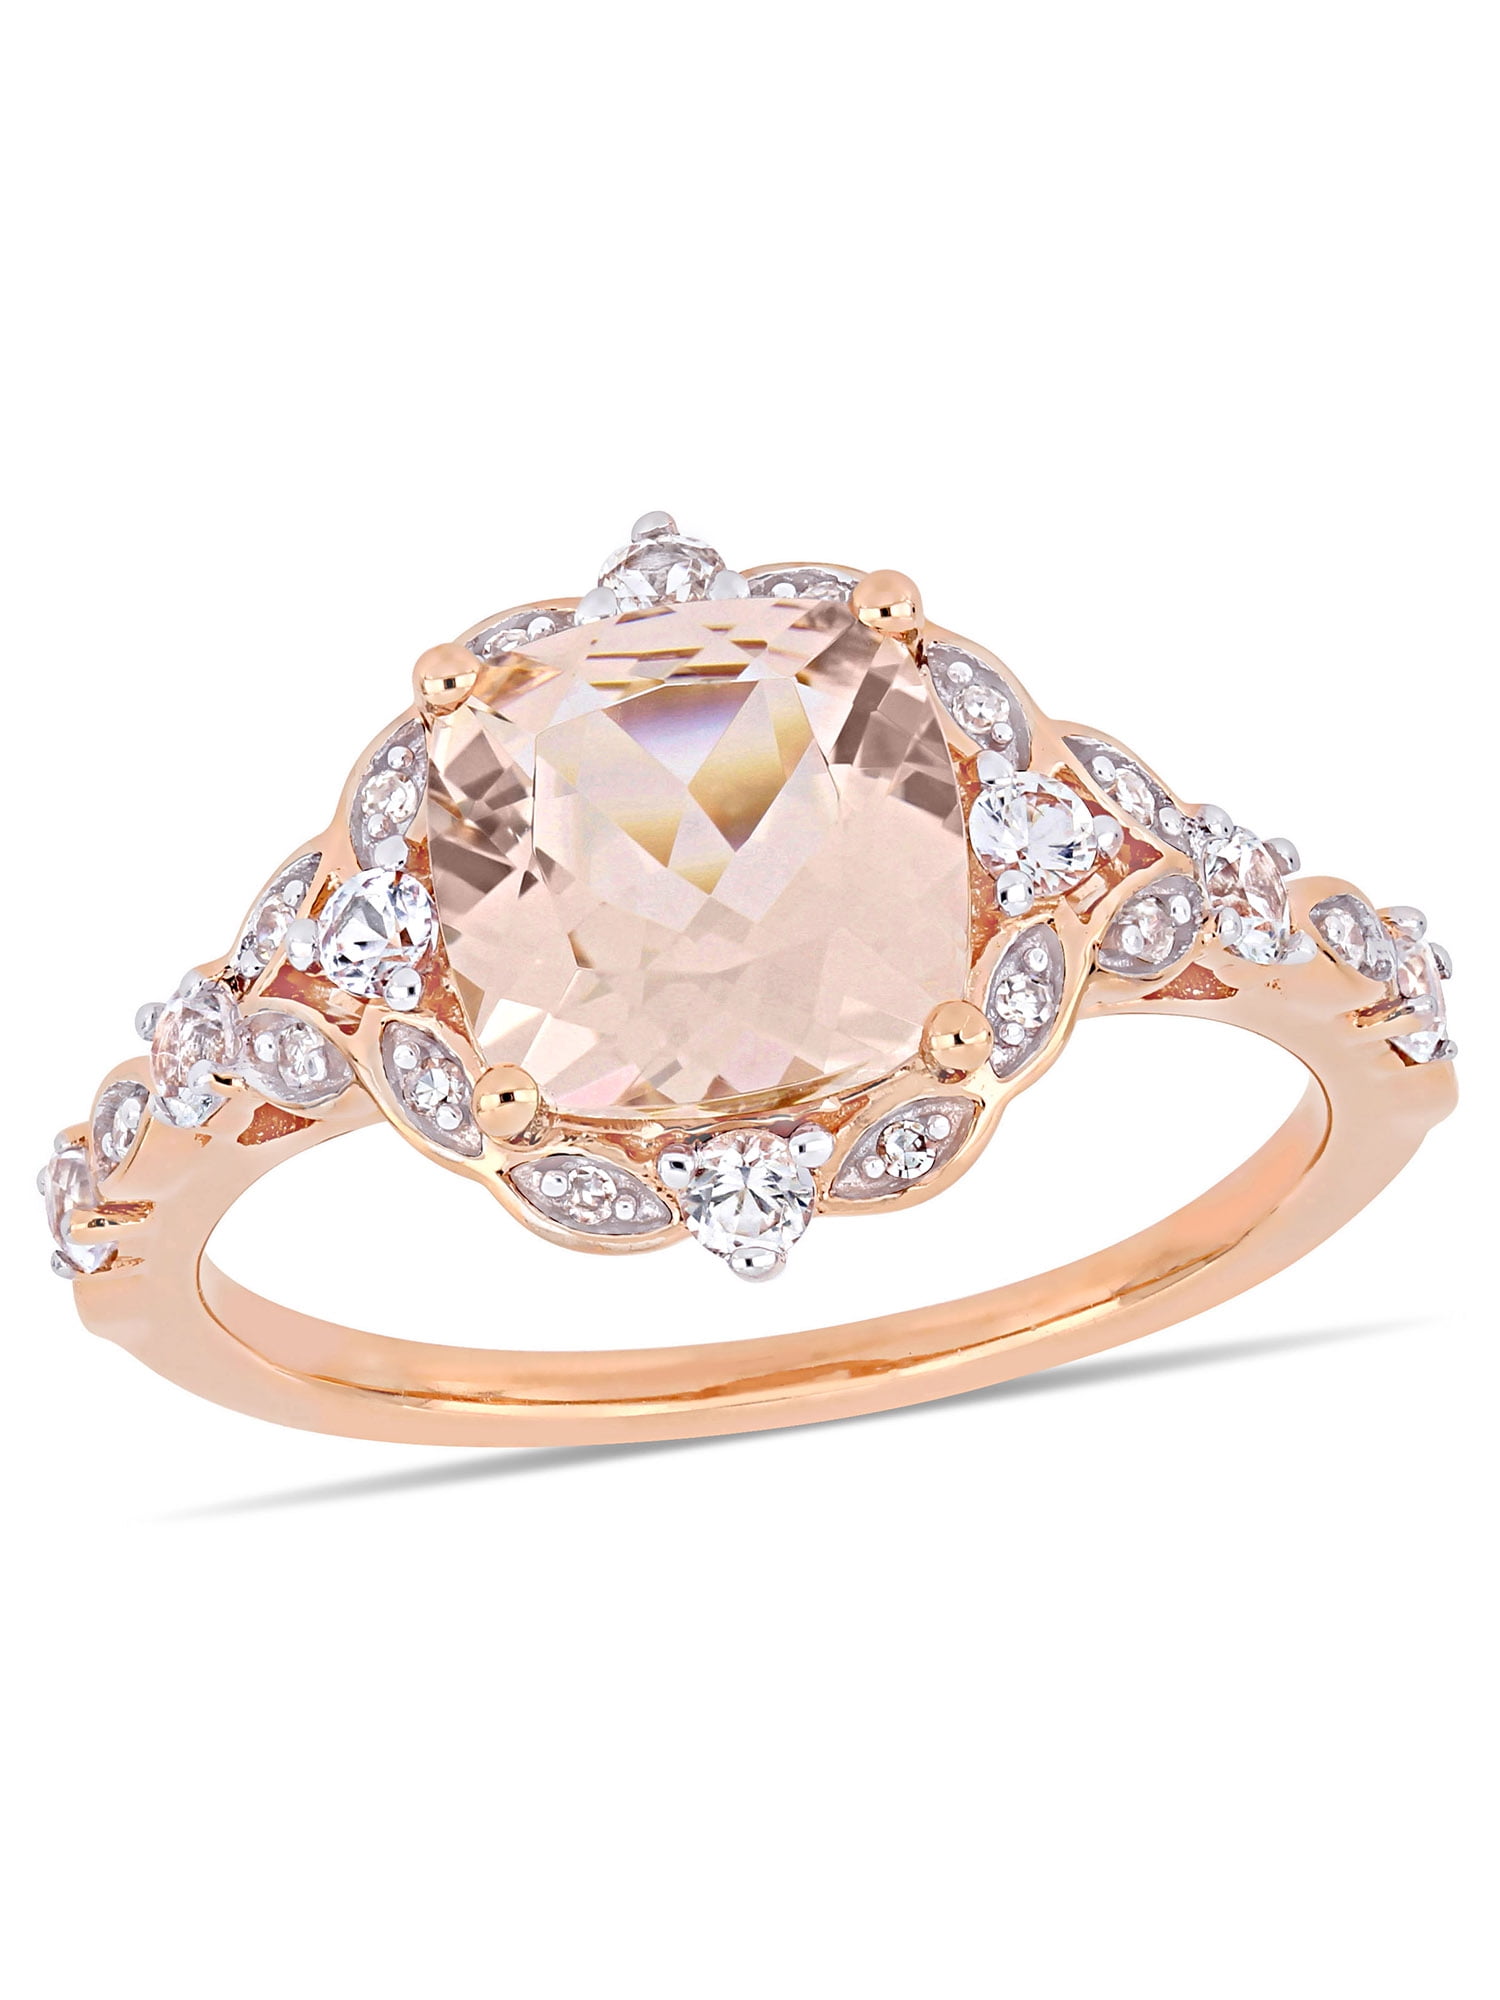 Rose gold and white sapphire rings hd 5870